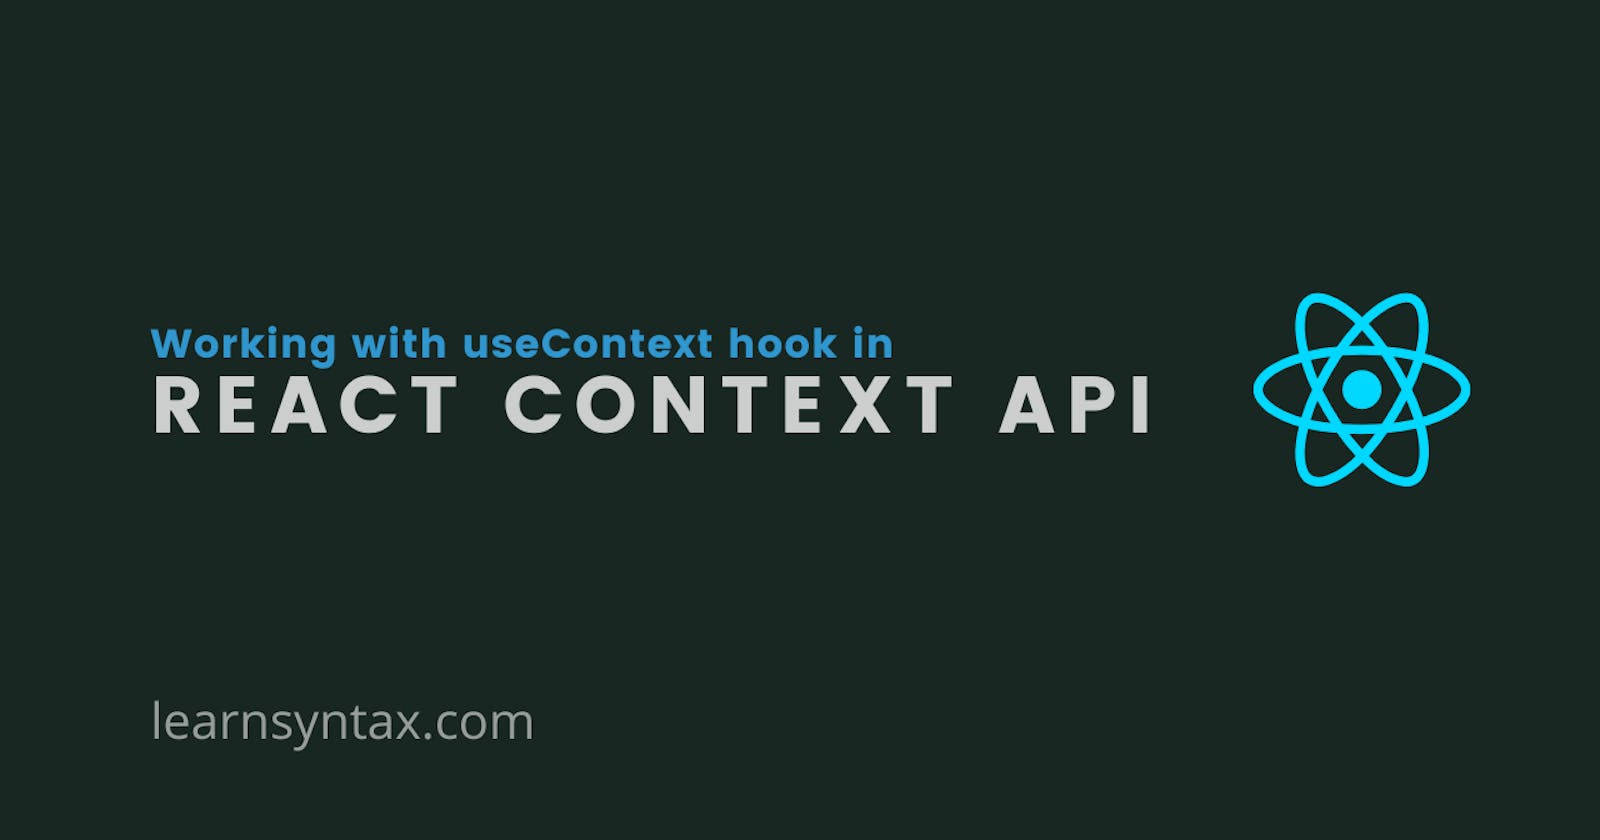 React Context API for handling global state